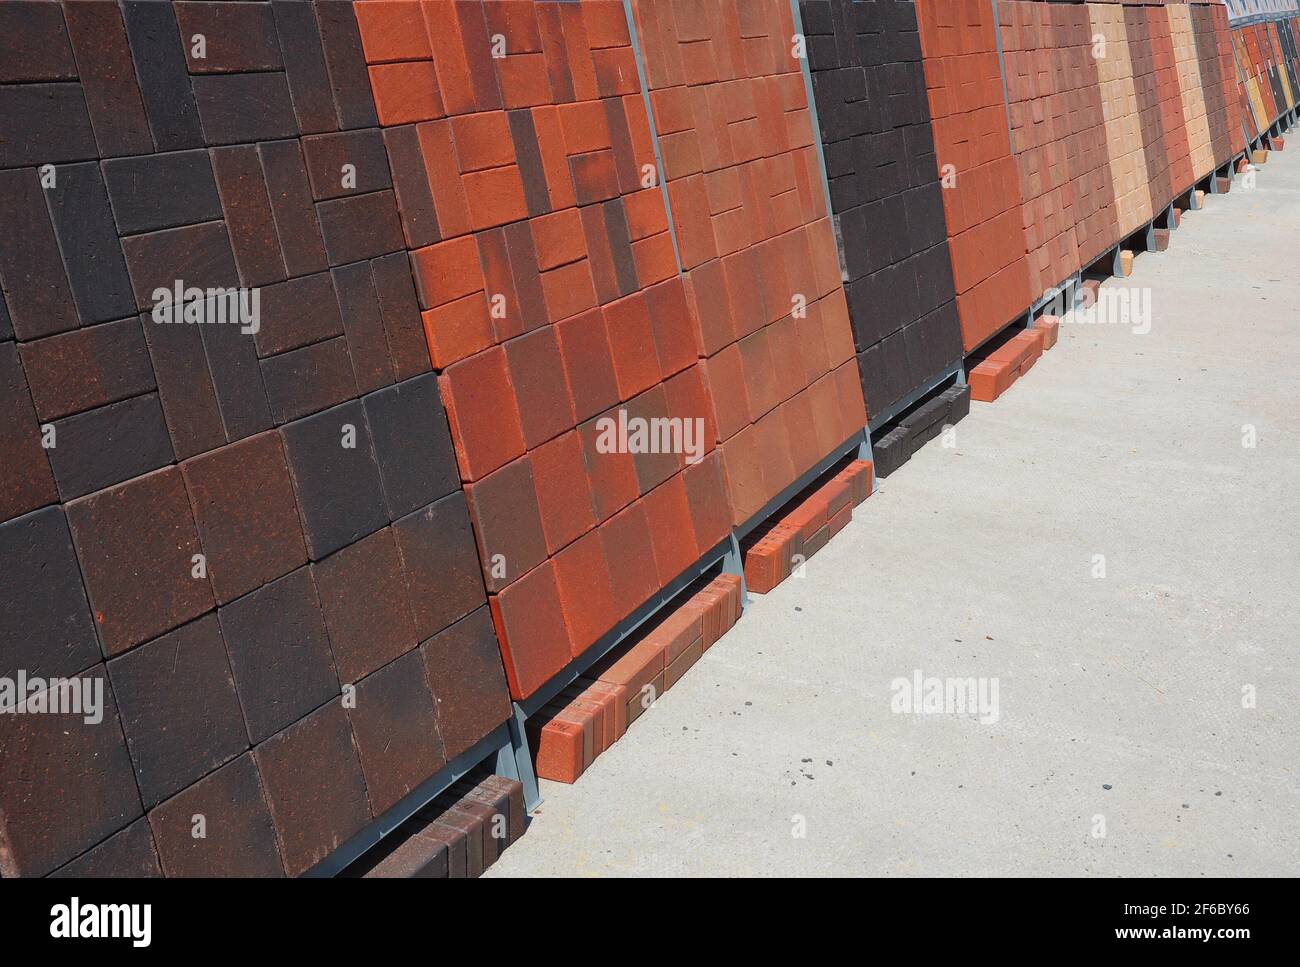 Stacks of pavers for sale. Building and construction materials, colored concrete pavers (paving stone) or patio blocks organized on pallets. Stock Photo